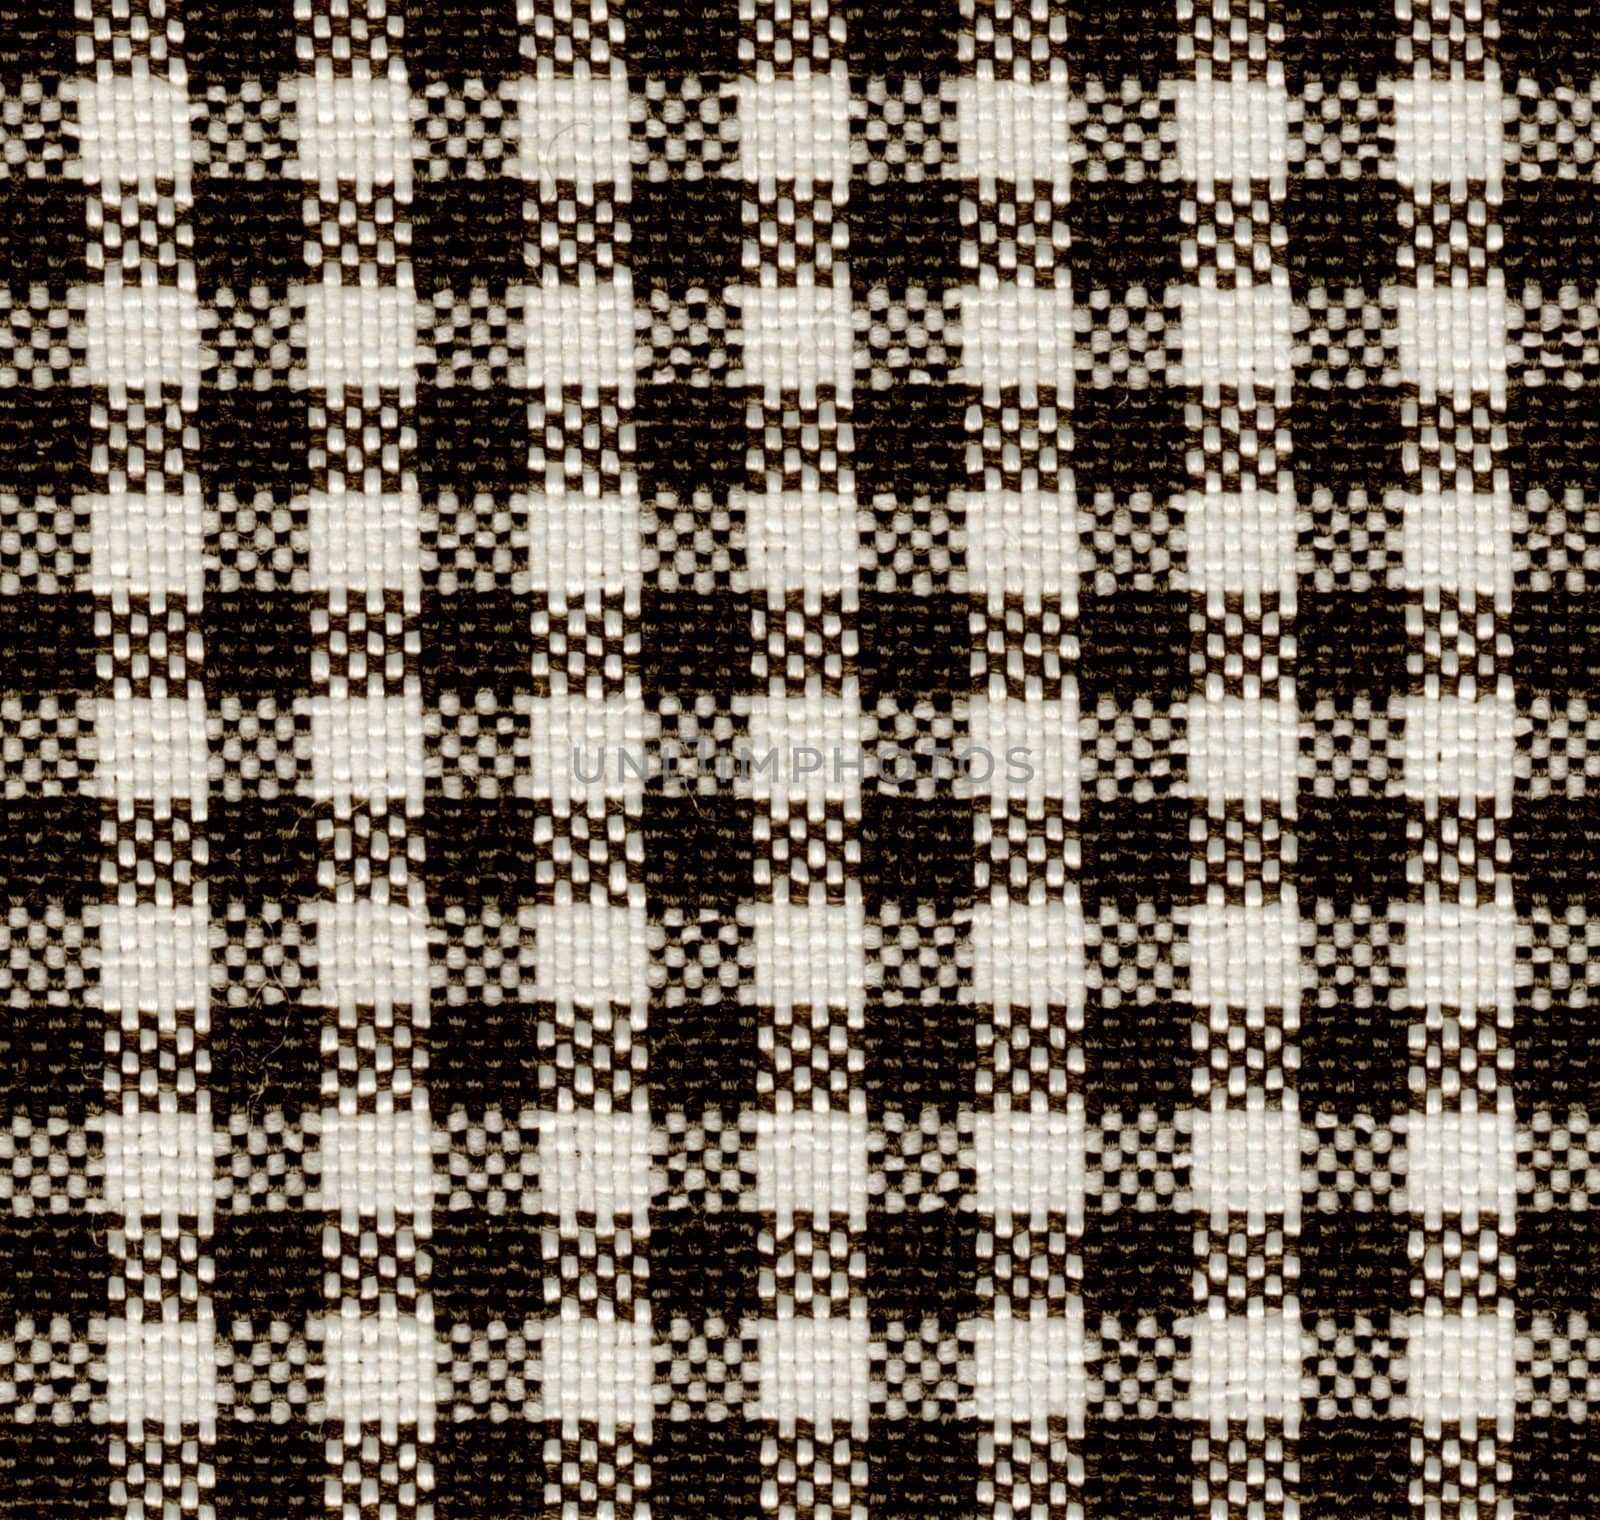 Black-white plaid pattern fabric texture. (High.res.scan by mg1408